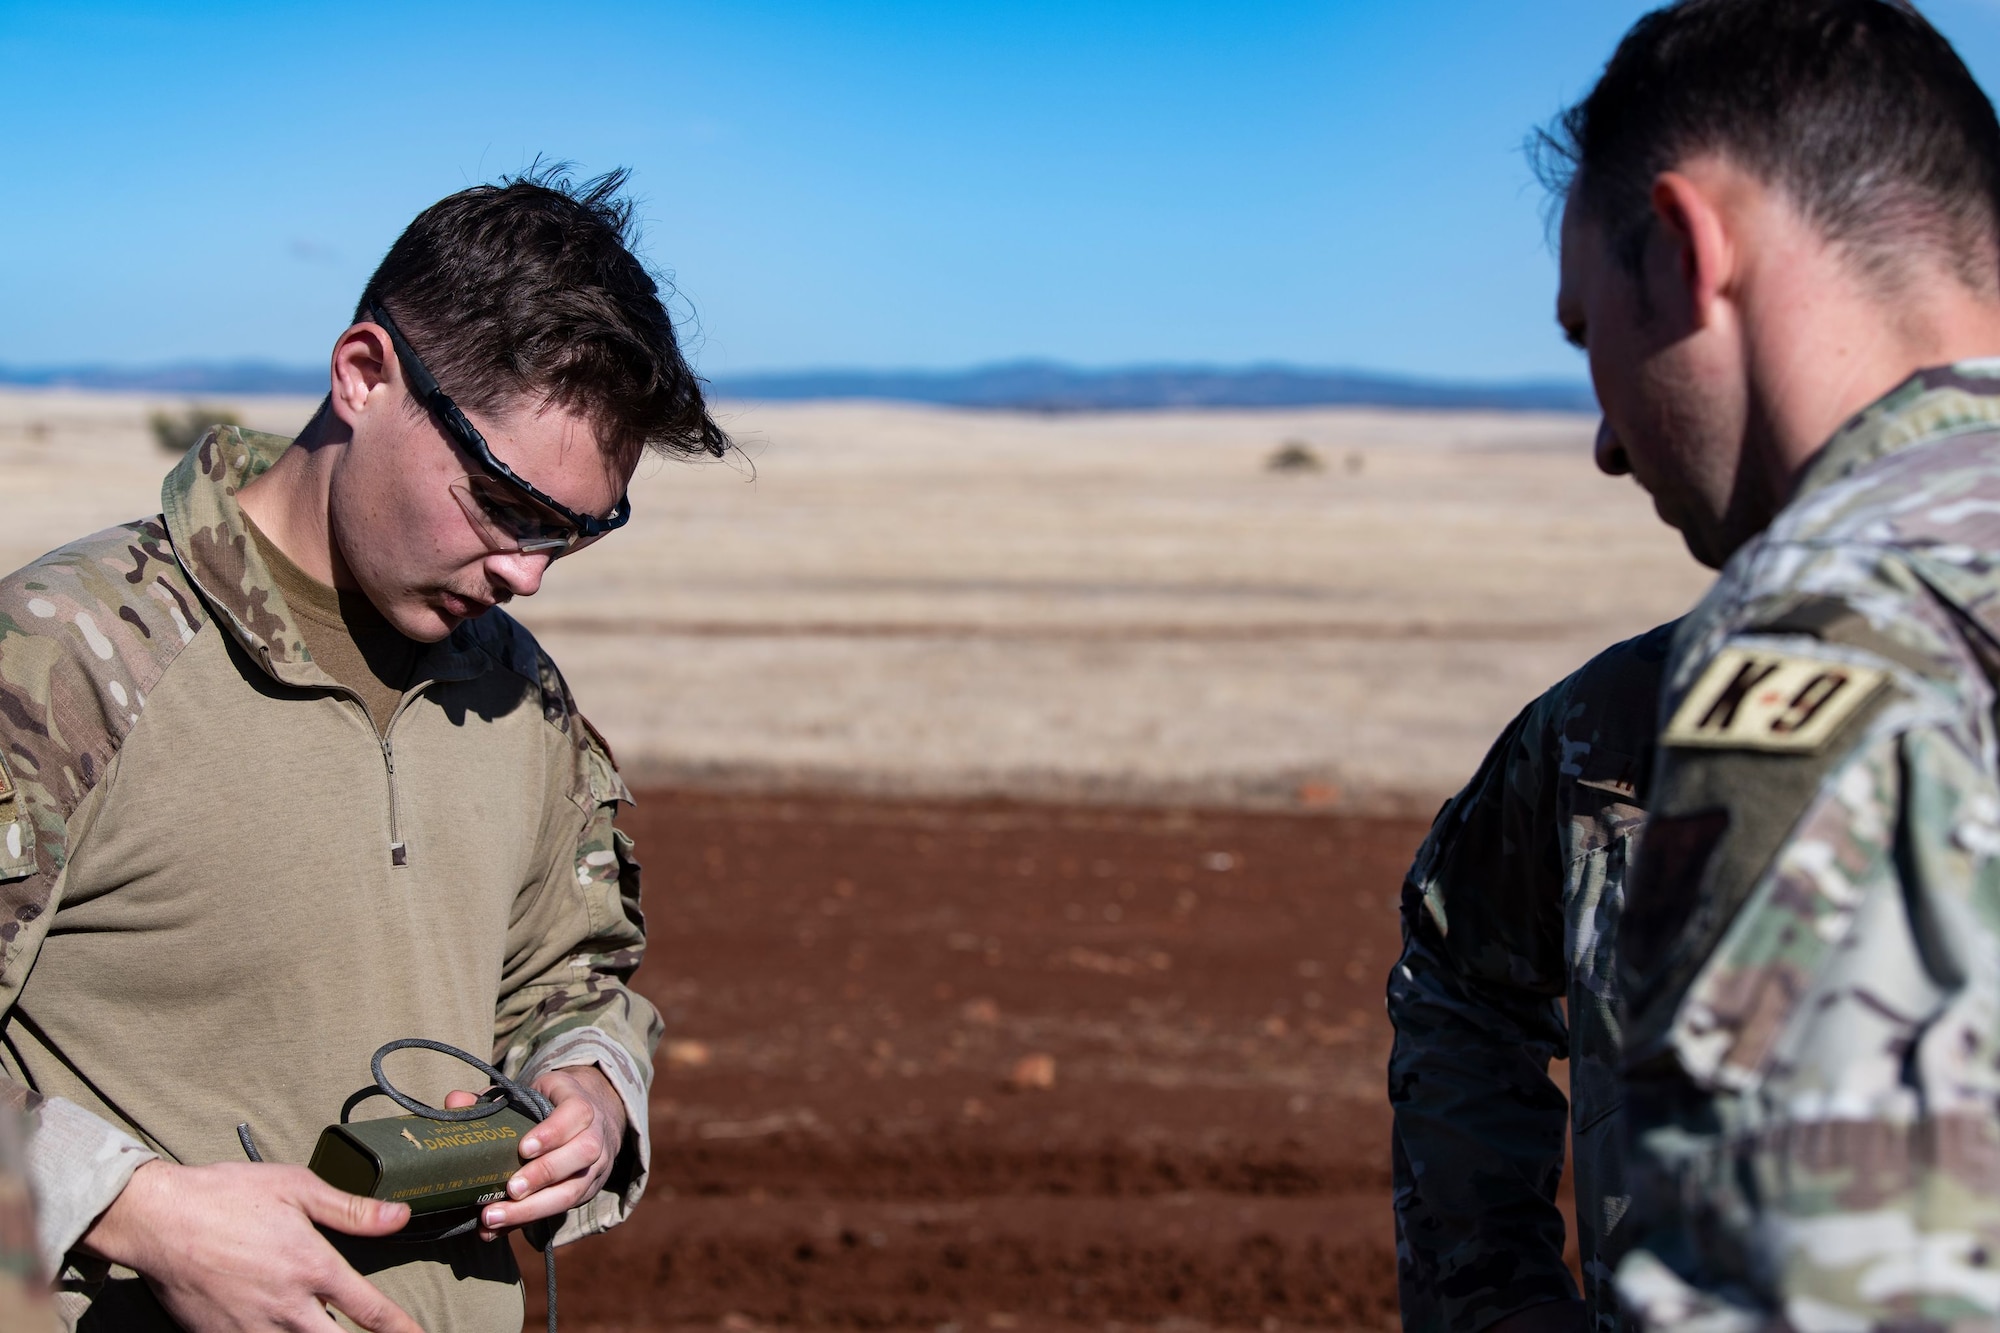 Senior Airman Hunter Rudnik, 9th Civil Engineering Squadron Explosive Ordnance Disposal team member, demonstrates how to wrap detonating cord for Staff Sgt. David Baumgartner, 9th Security Forces Squadron (SFS) K-9 handler, during military working dog detection training on Beale Air Force Base.